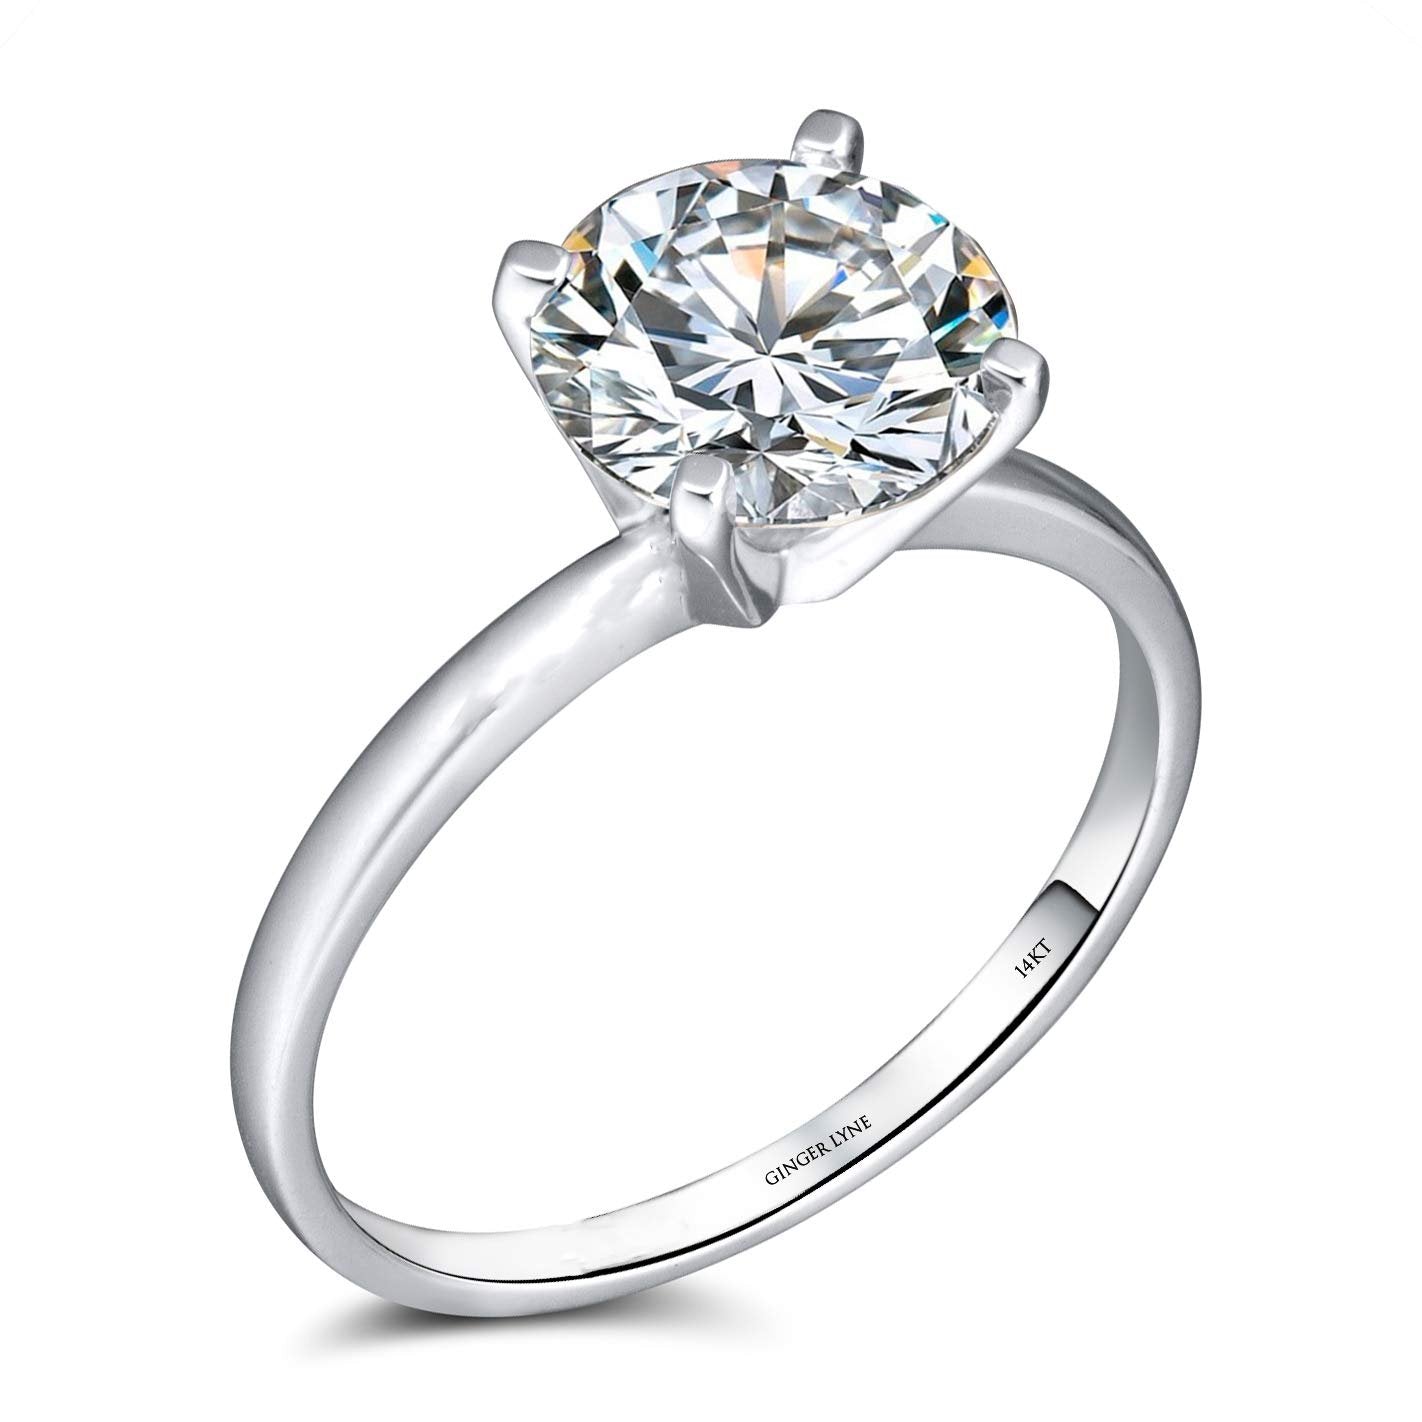 Amore Engagement Ring Women 2 Ct Moissanite 14K Gold Solitaire Ginger Lyne Collection - 2 CT,9